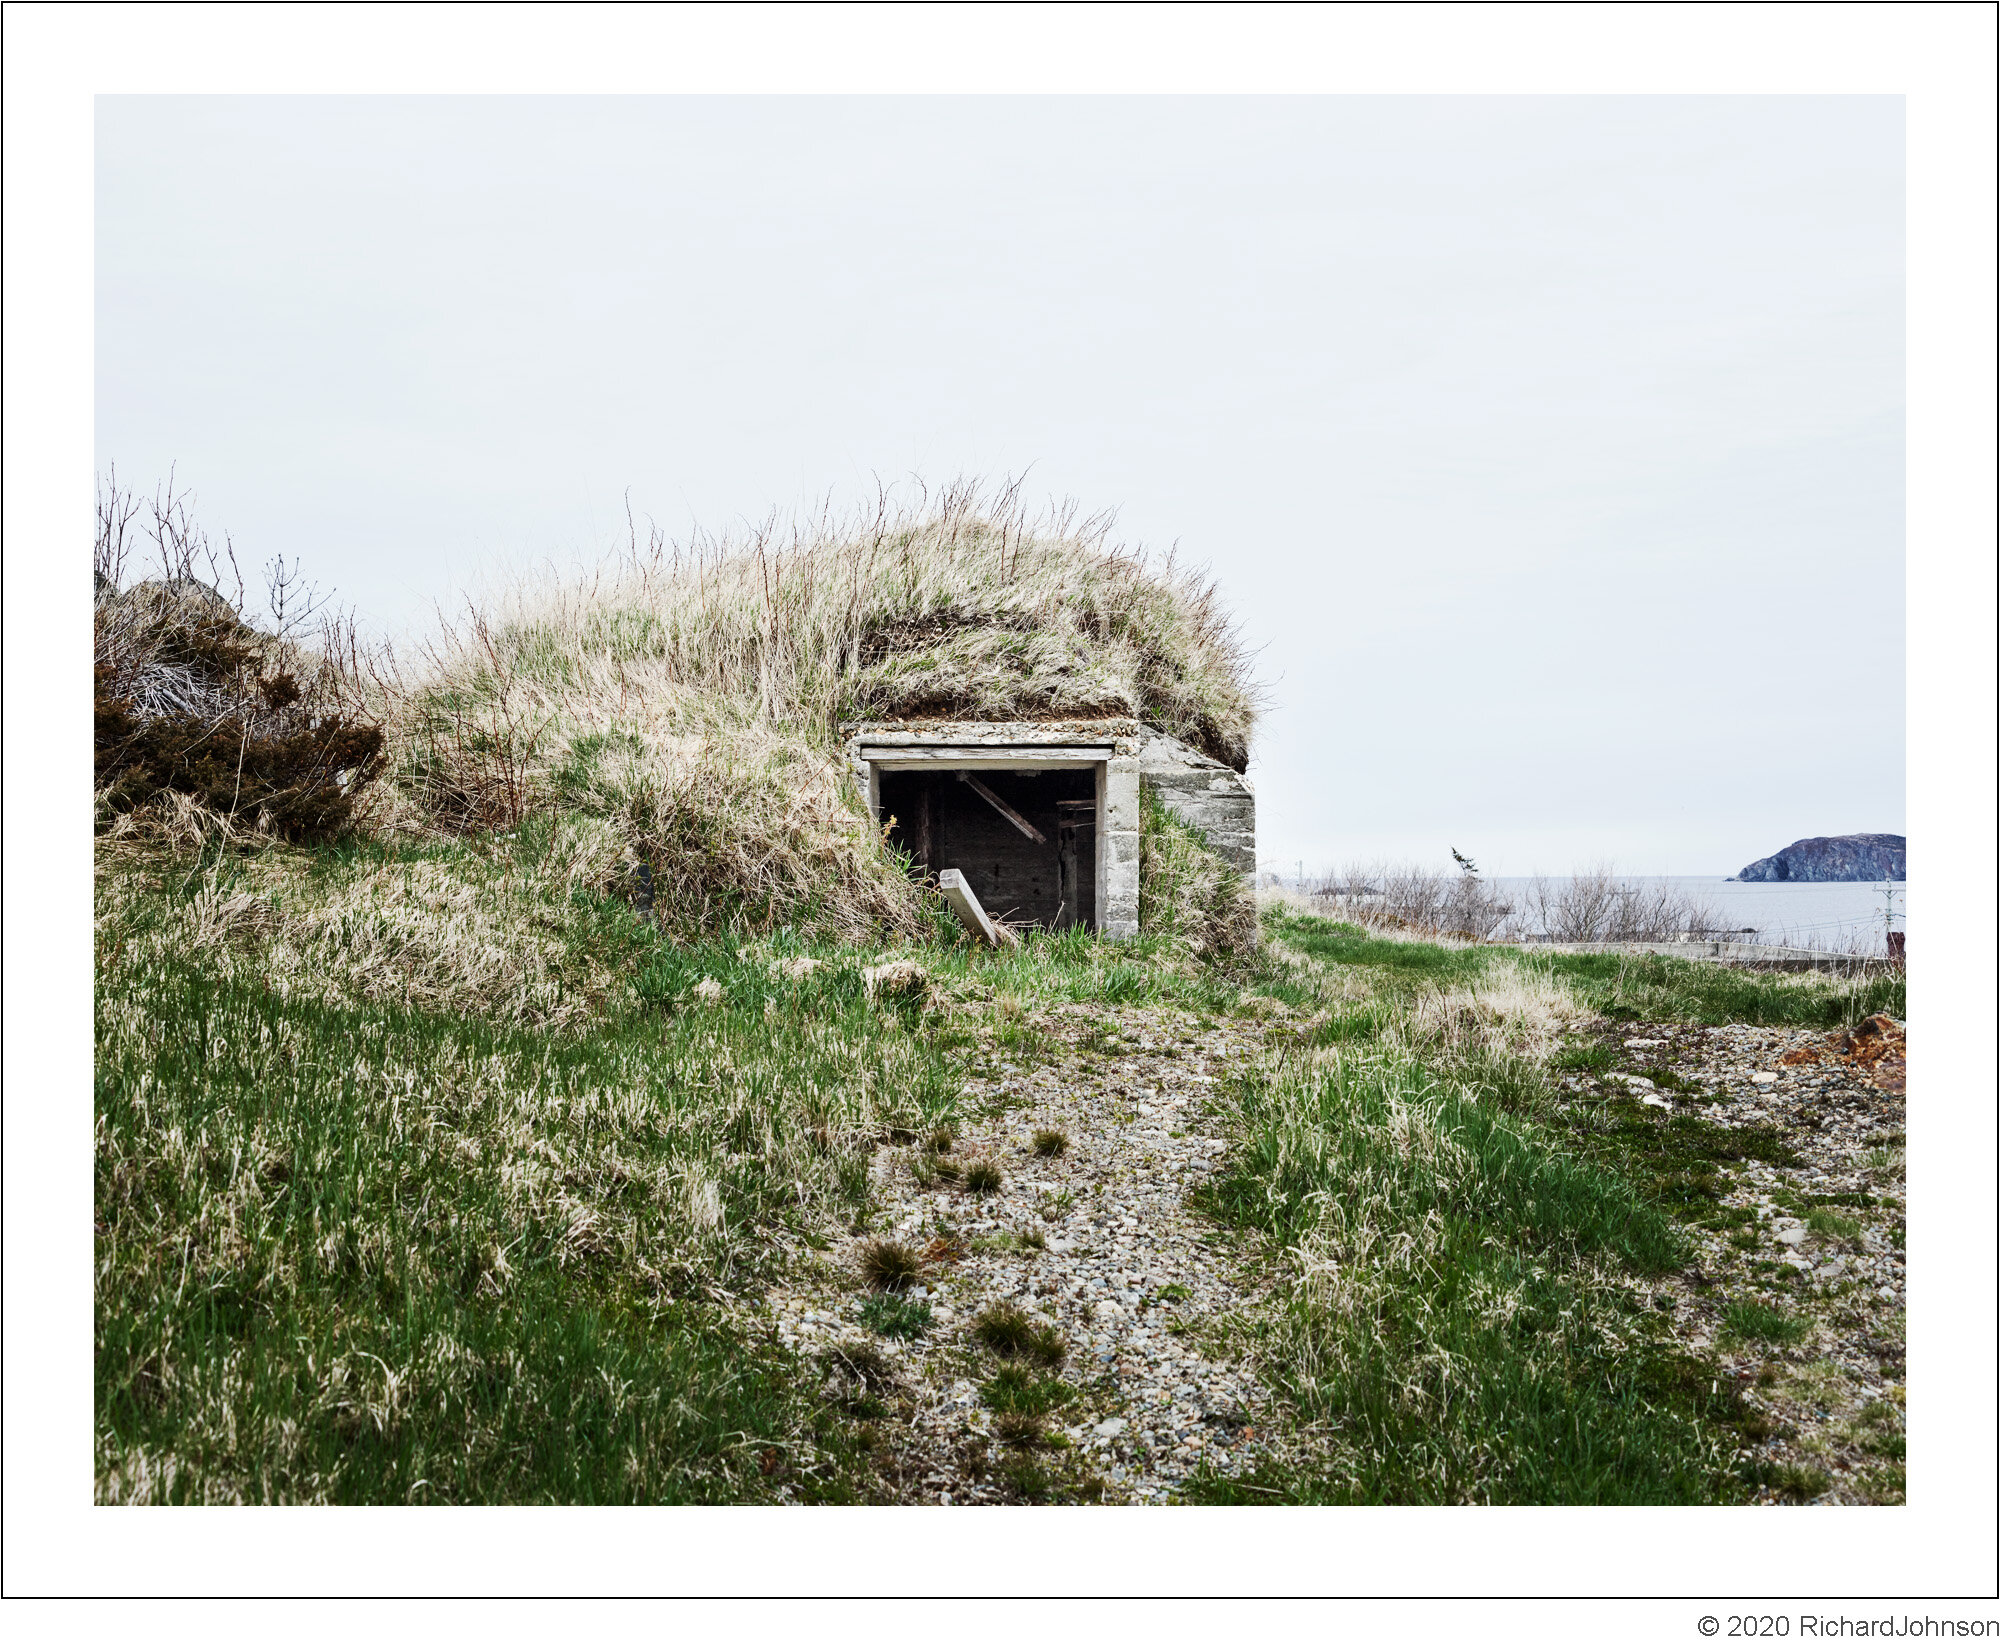 Root Cellar # 08, Smith's Lookout, Twillingate, Newfoundland, Canada, 2018